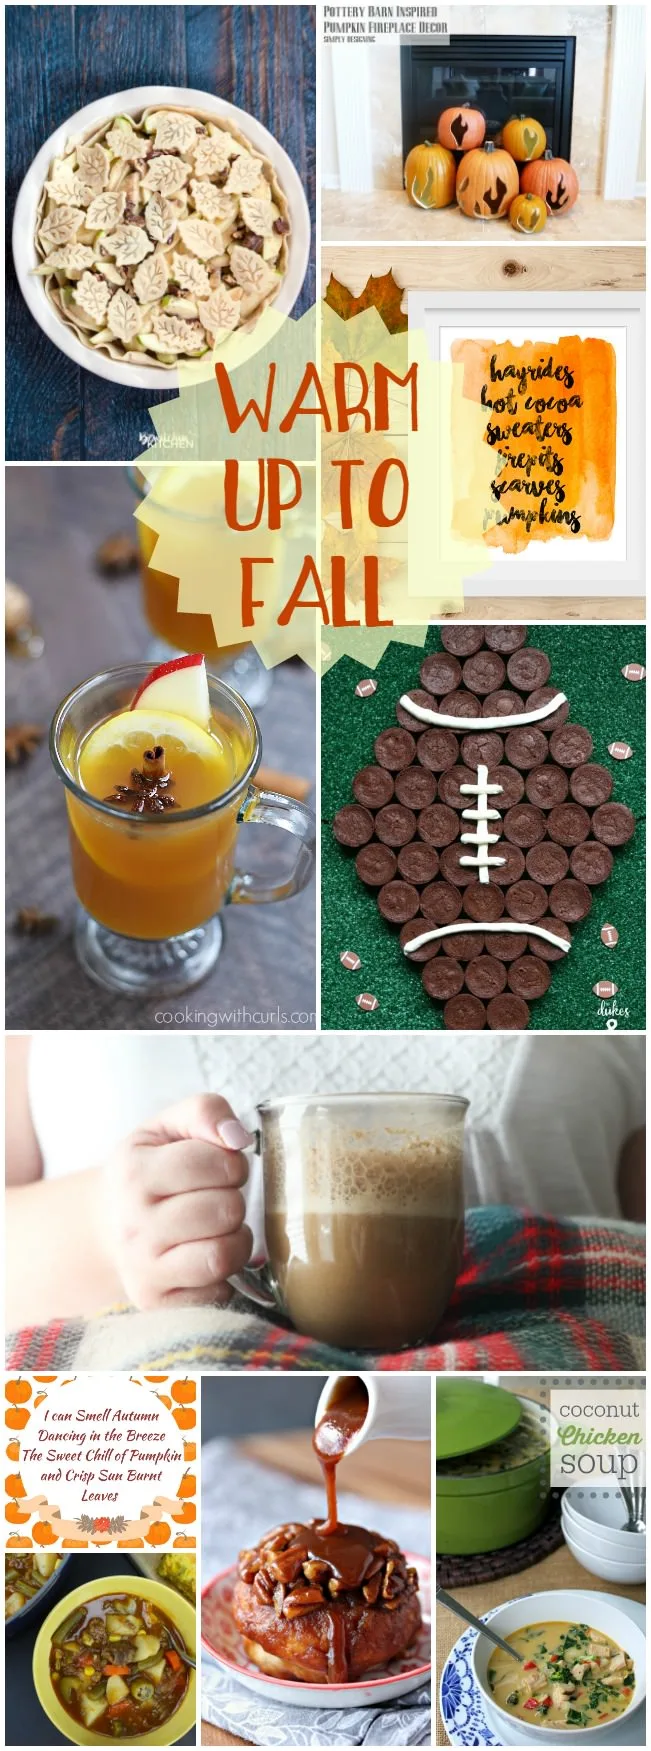 Warm up to Fall with this fun collection of food, drinks and crafts.